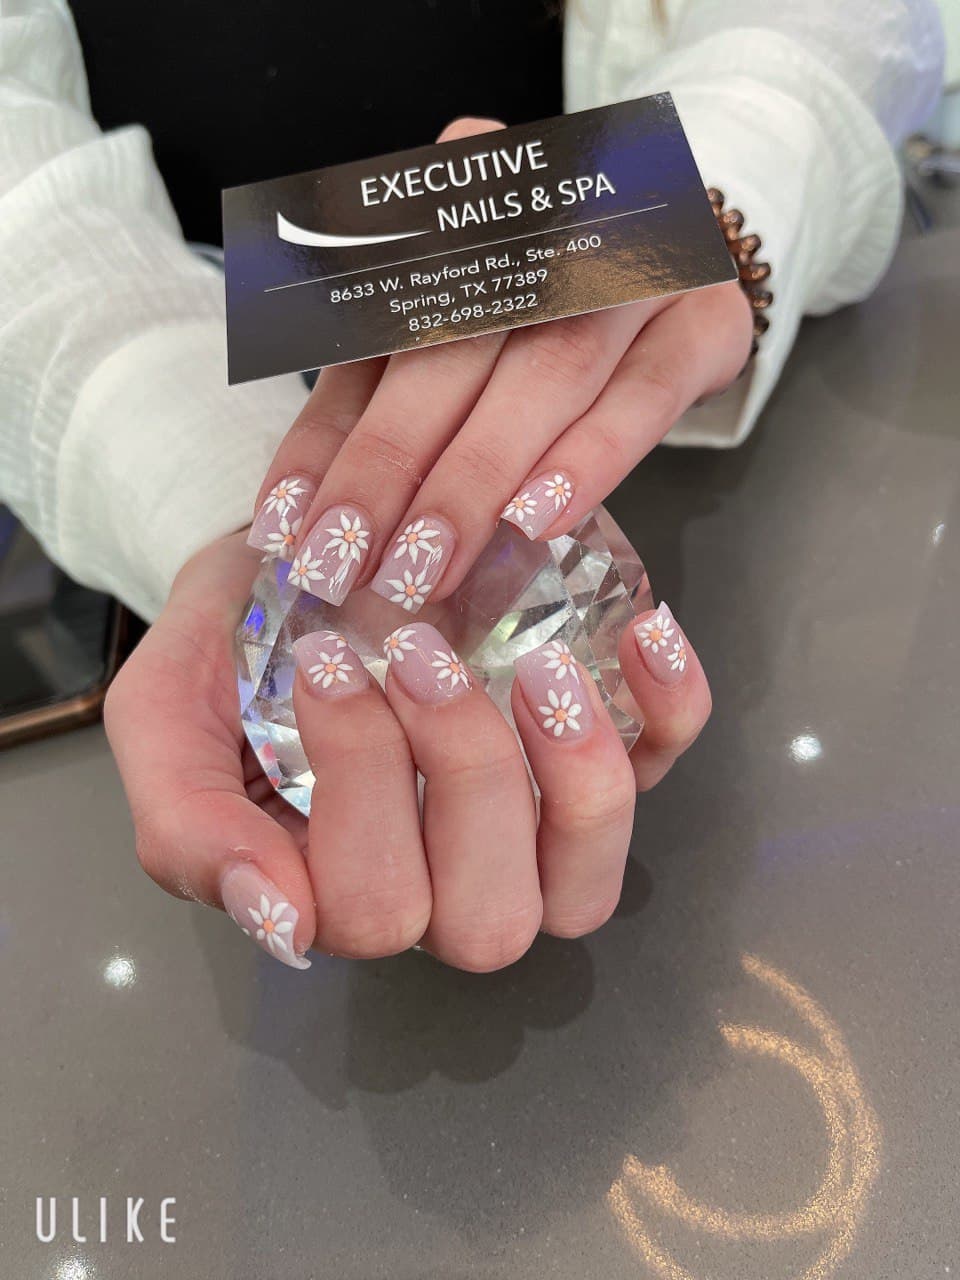 gallery - Executive Nails and Spa in Spring, Texas 77389